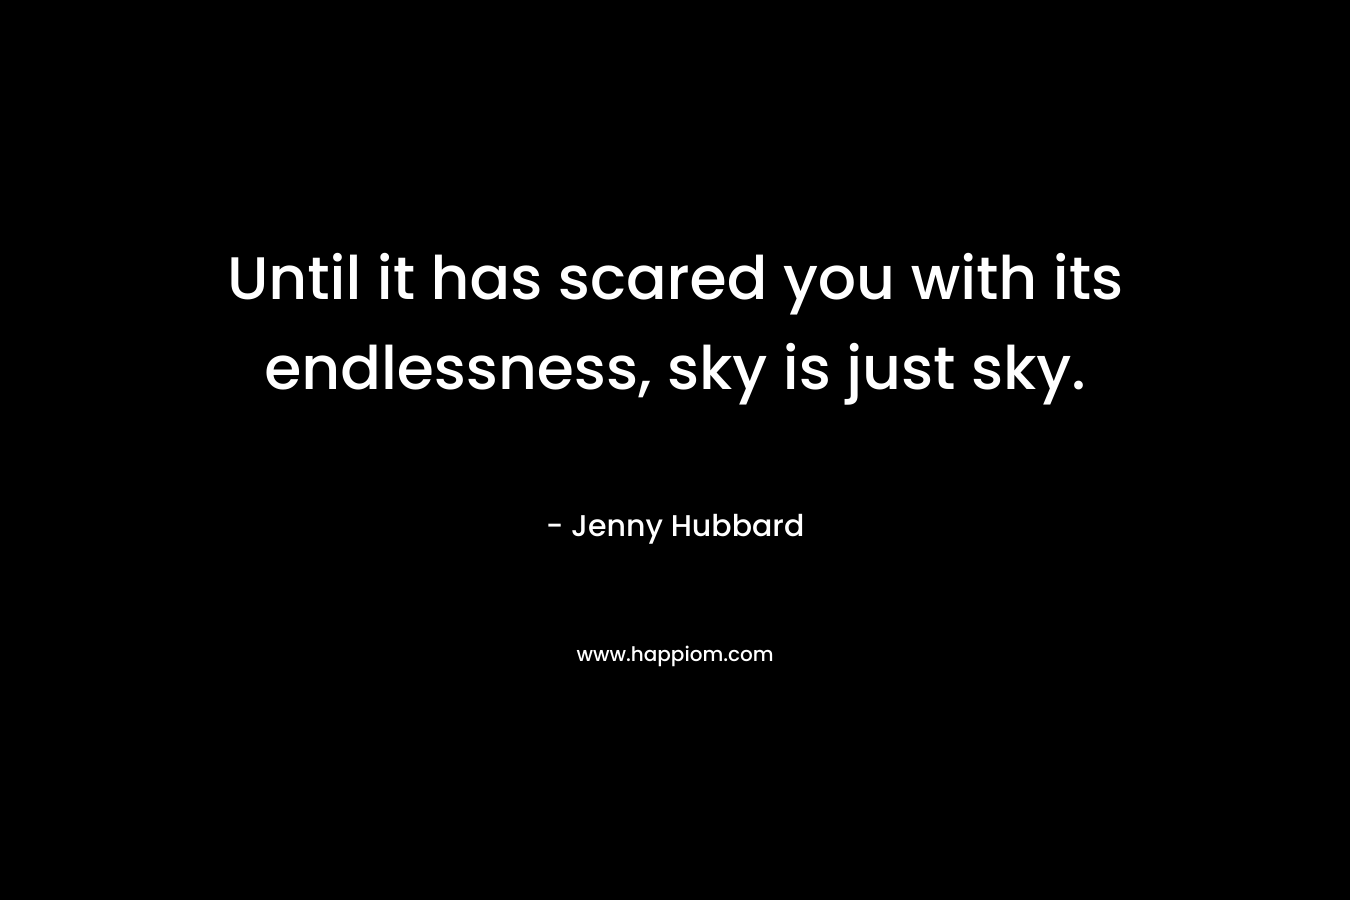 Until it has scared you with its endlessness, sky is just sky.